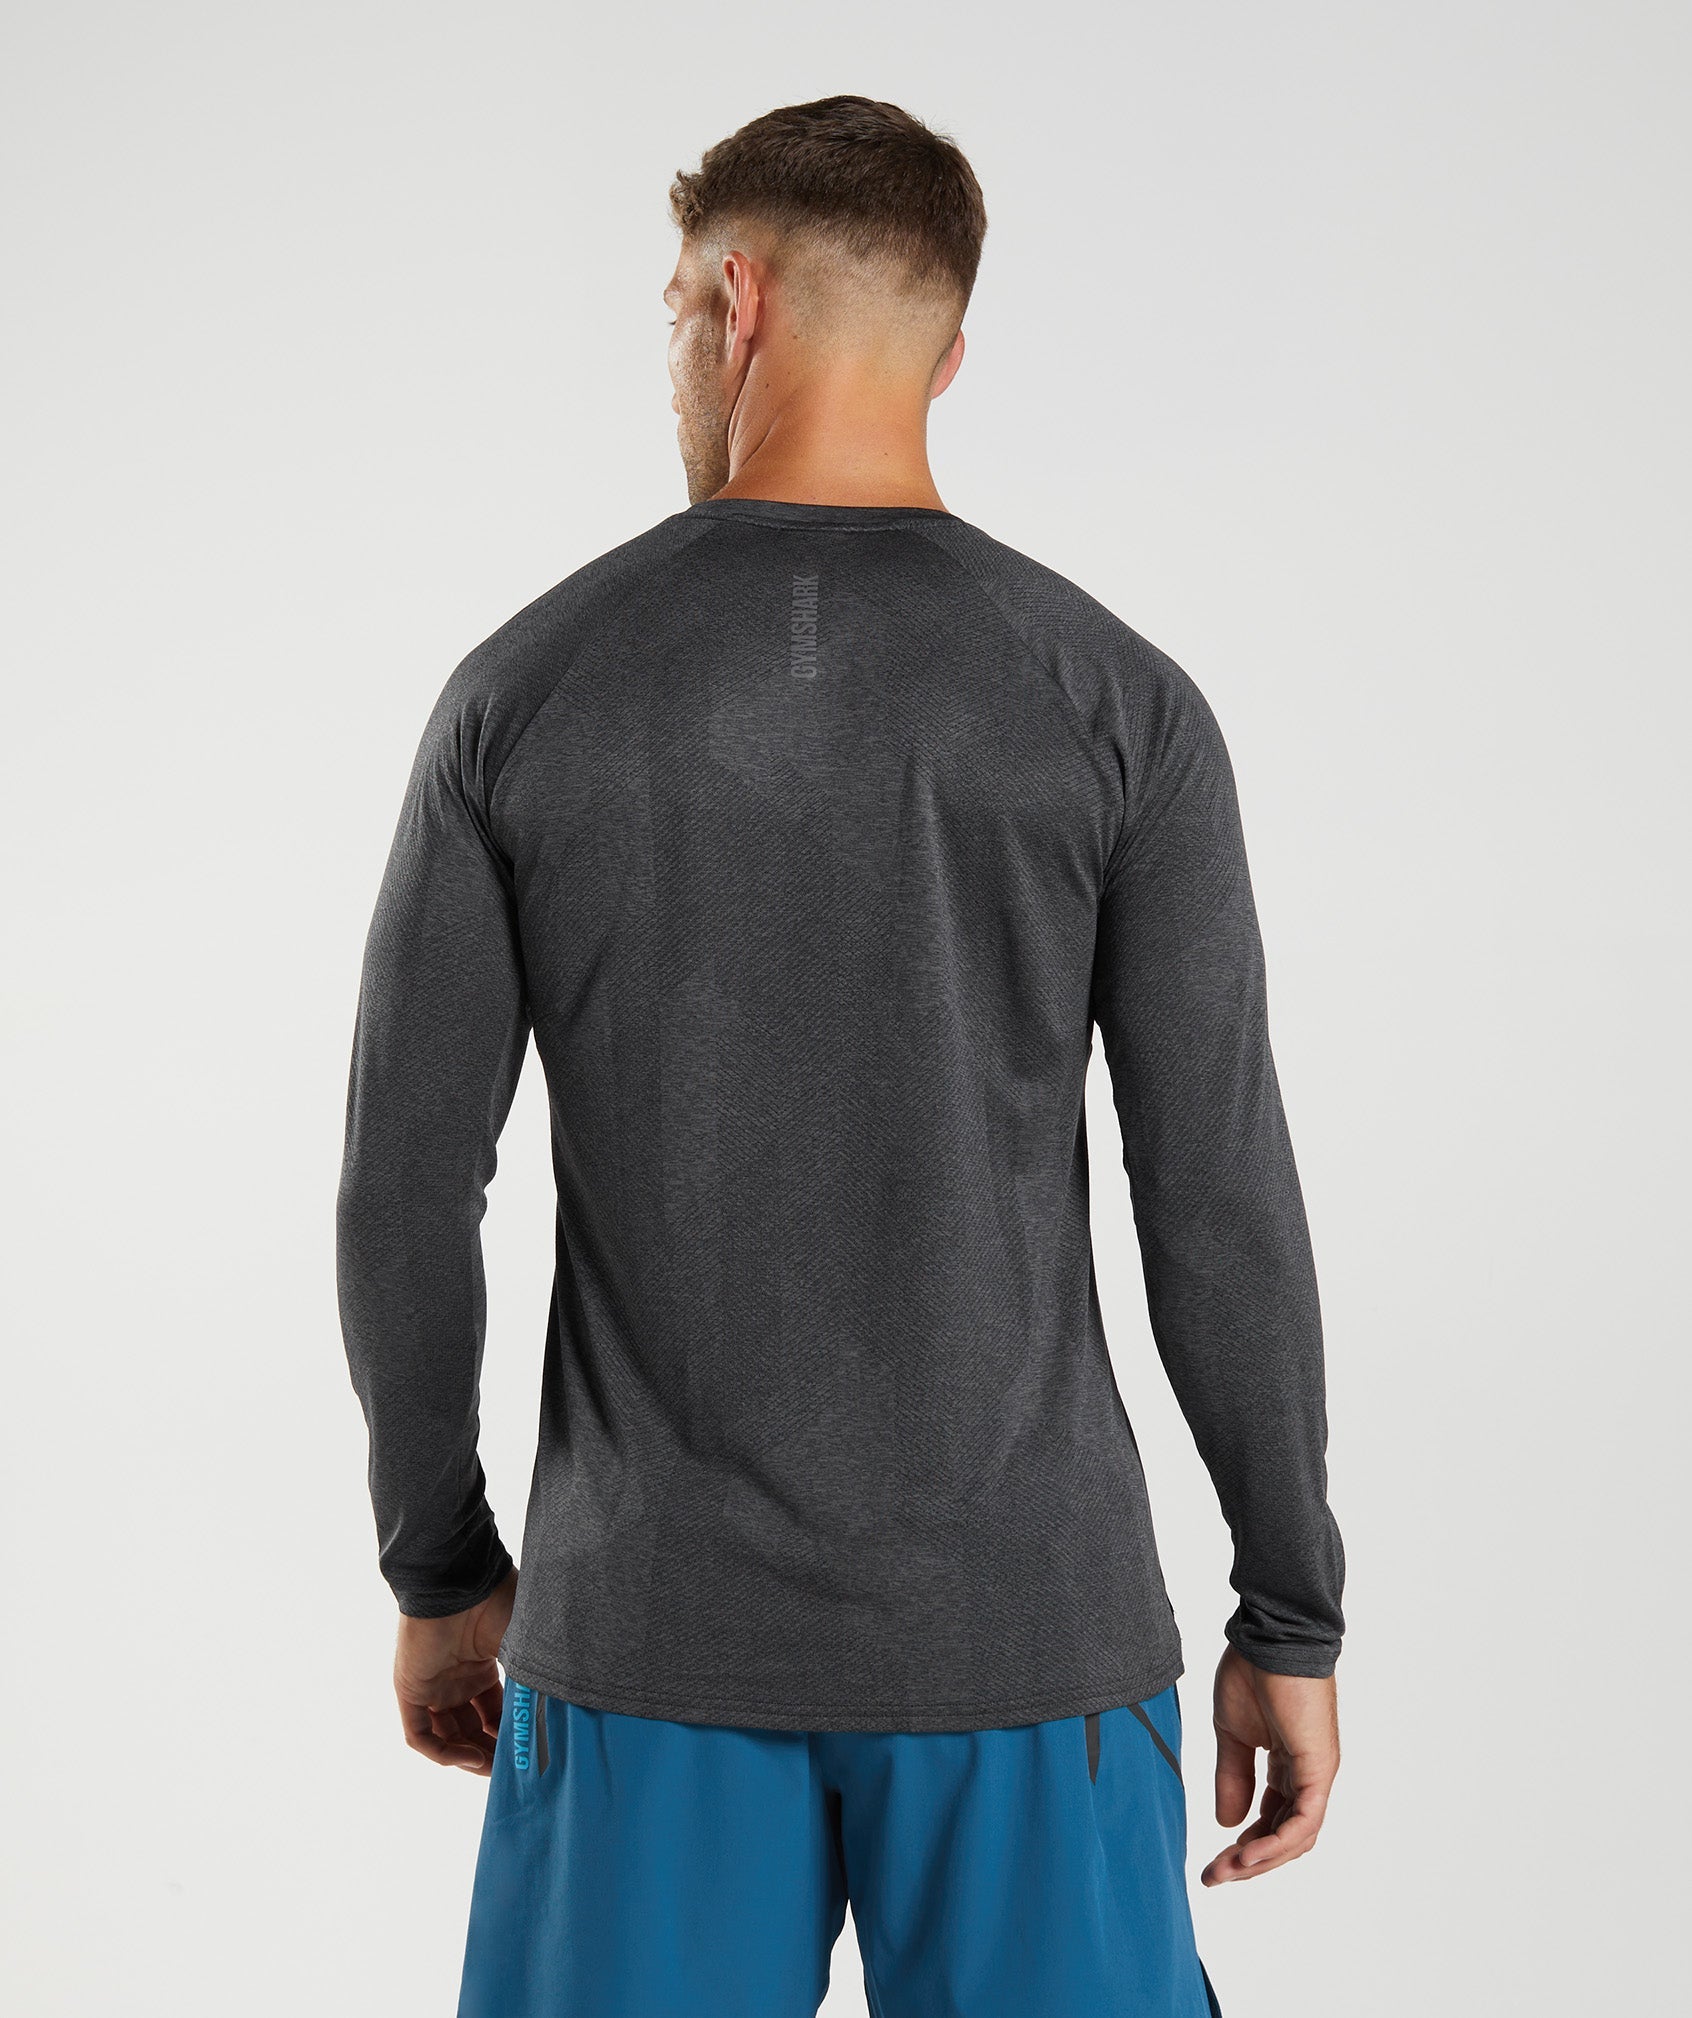 Apex Long Sleeve T-Shirt in Black/Silhouette Grey - view 2